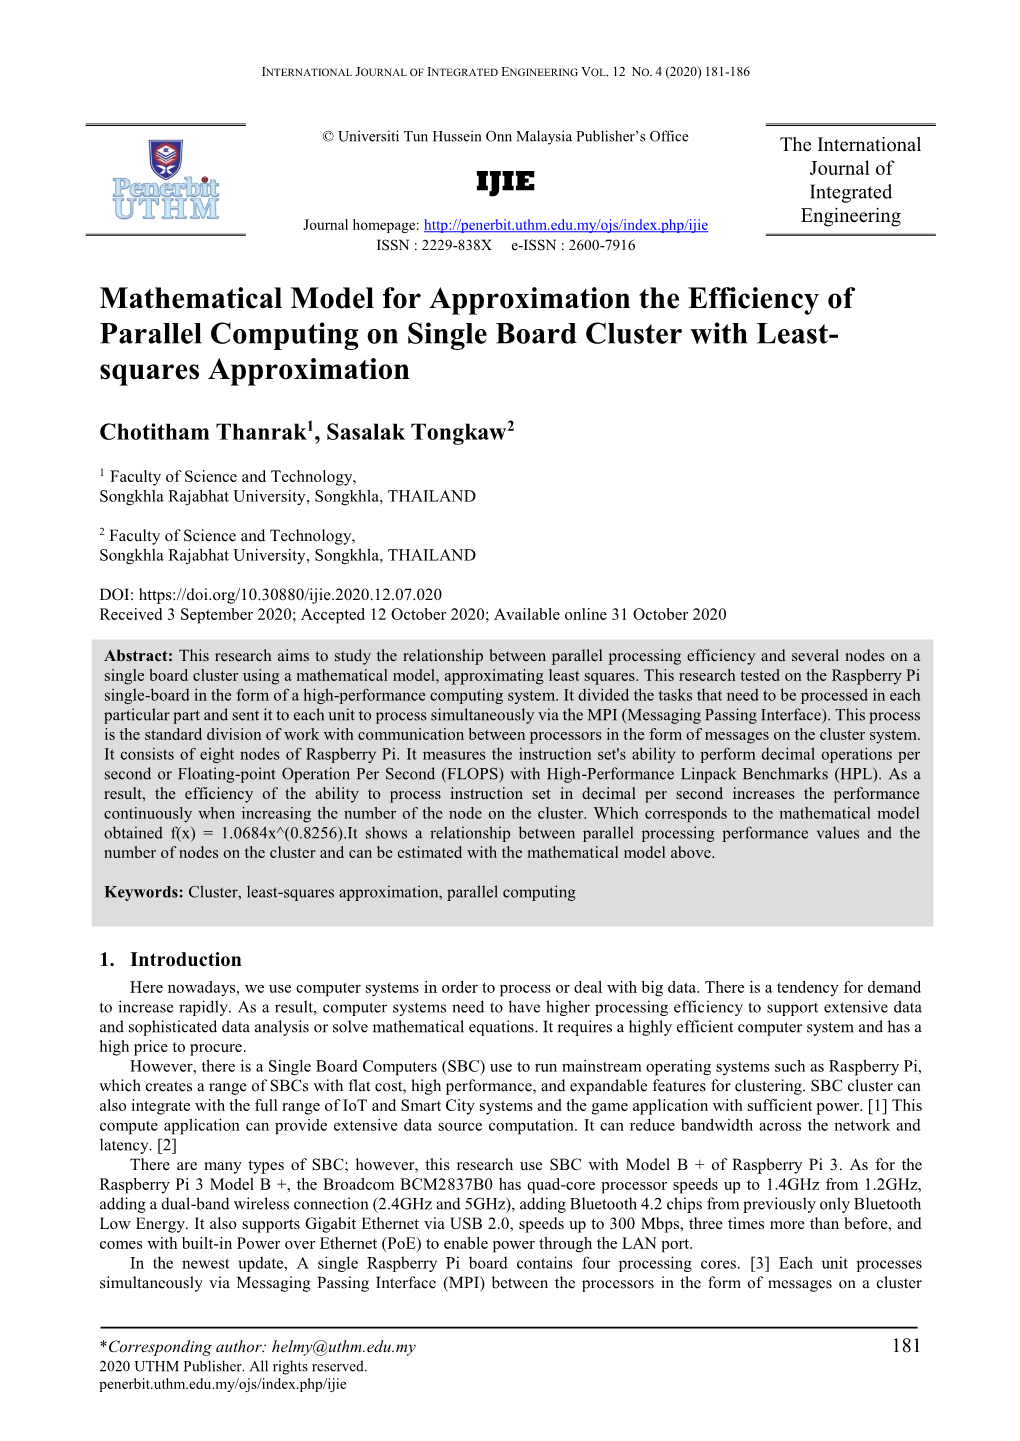 Mathematical Model for Approximation the Efficiency of Parallel Computing on Single Board Cluster with Least- Squares Approximation